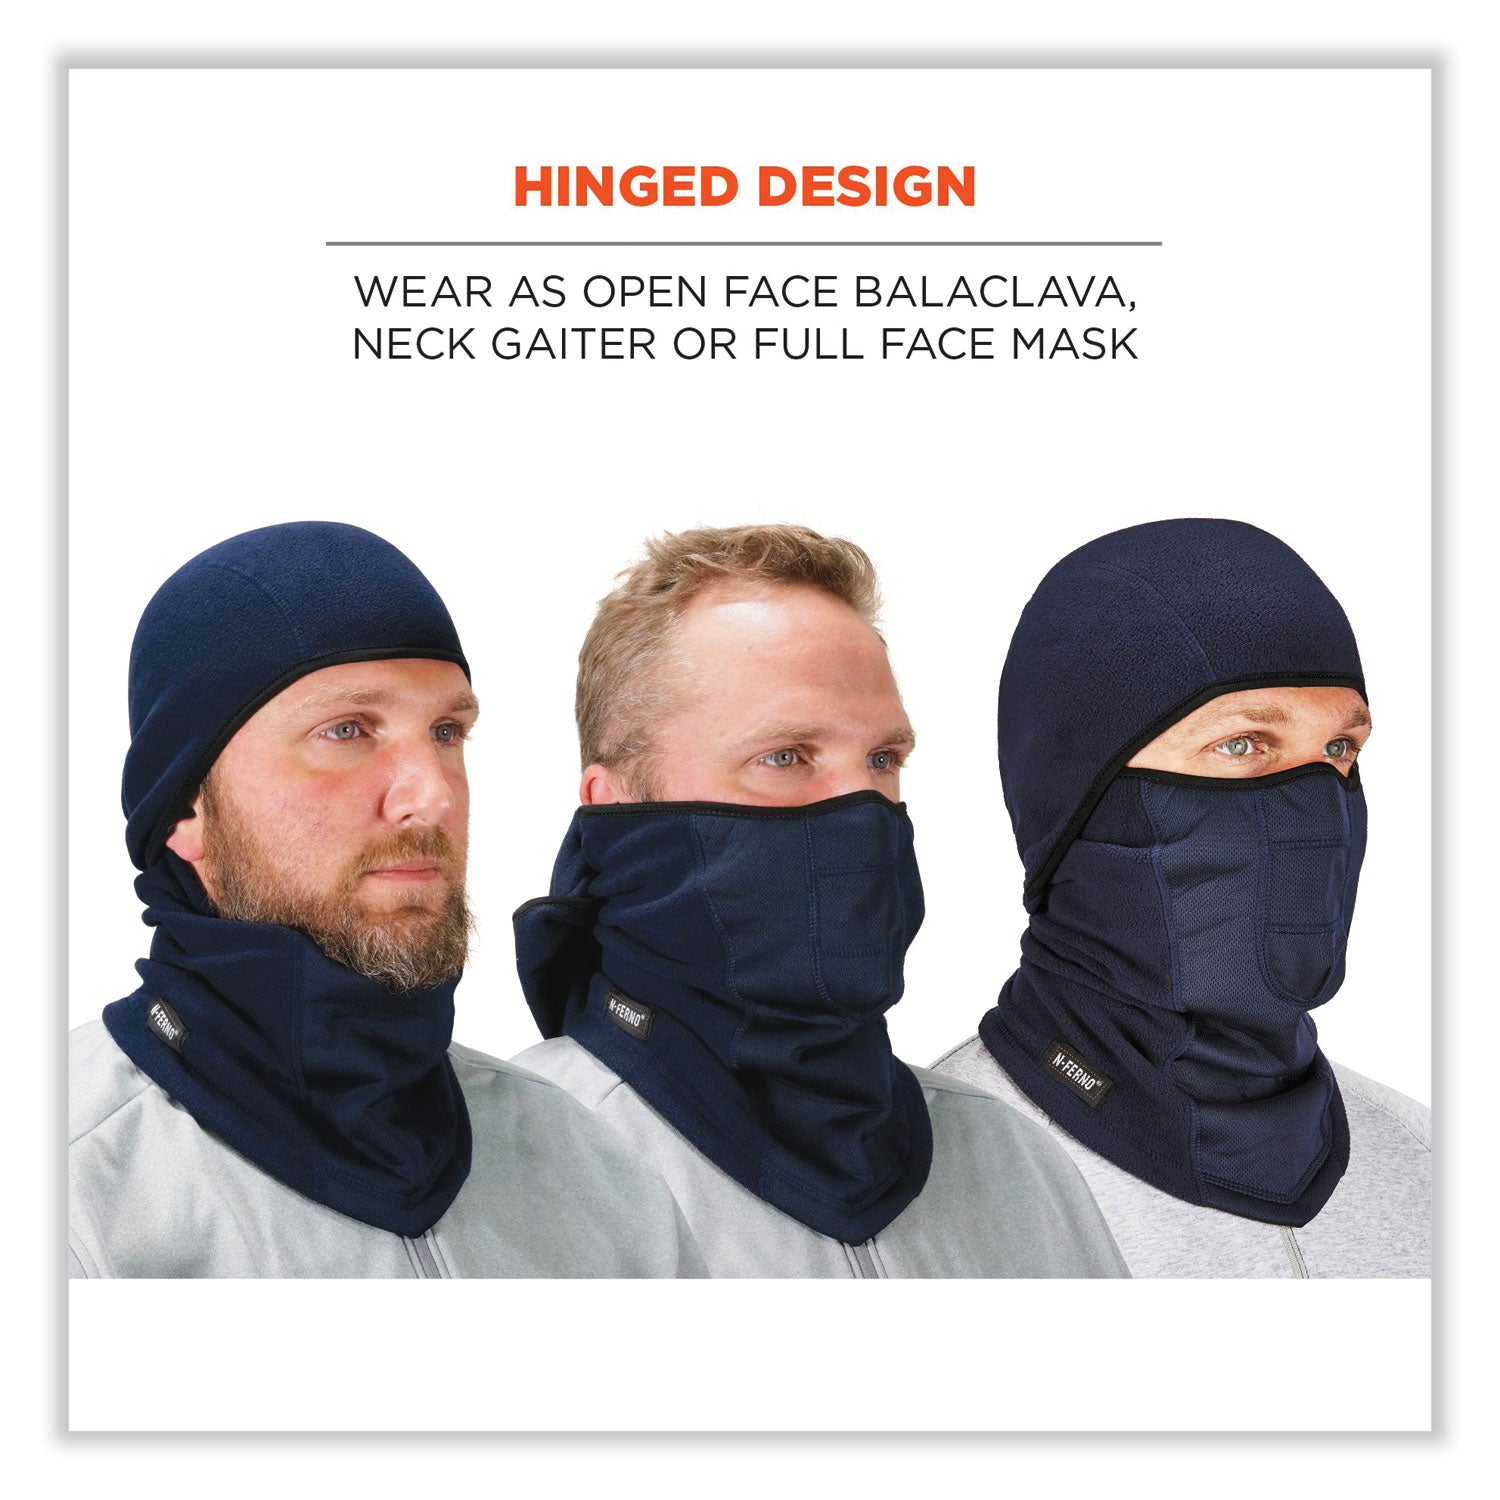 n-ferno-6823-hinged-balaclava-face-mask-fleece-one-size-fits-most-navy-ships-in-1-3-business-days_ego16851 - 6